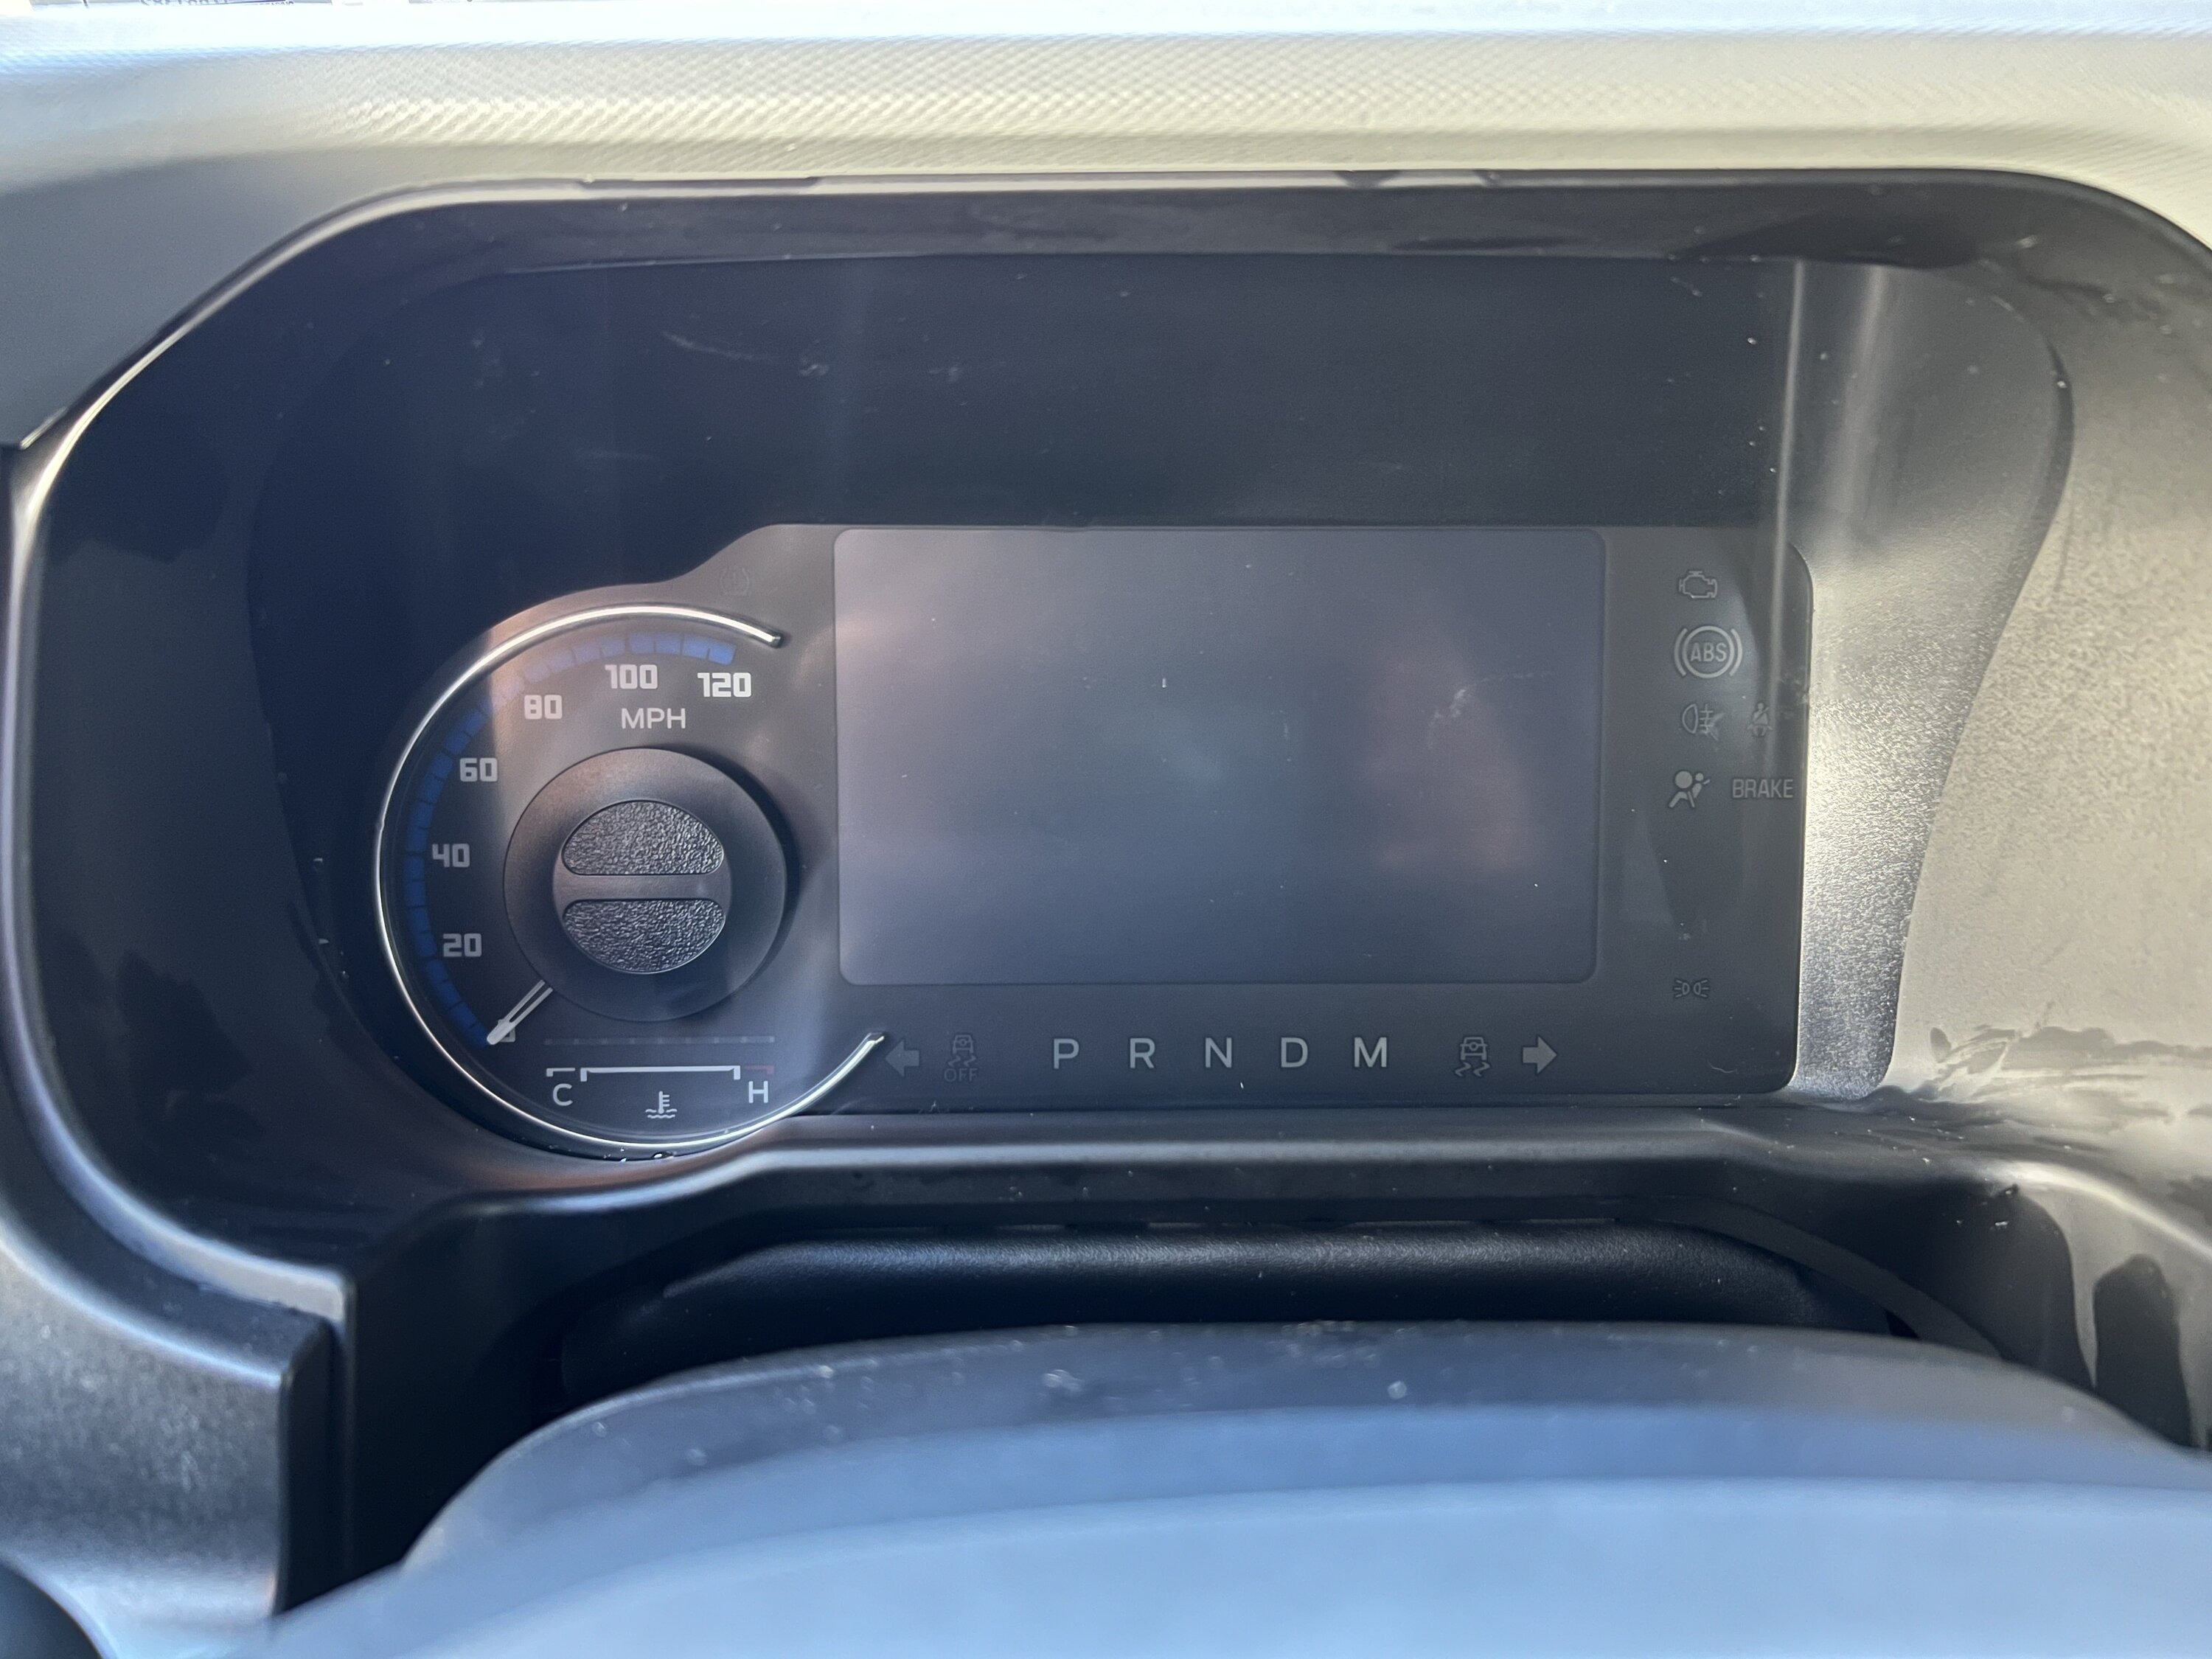 Ford Bronco Screen ProTech display screen & gauge cluster protection film - installation & review C1454CE6-936F-4819-8F82-696C7BED2051